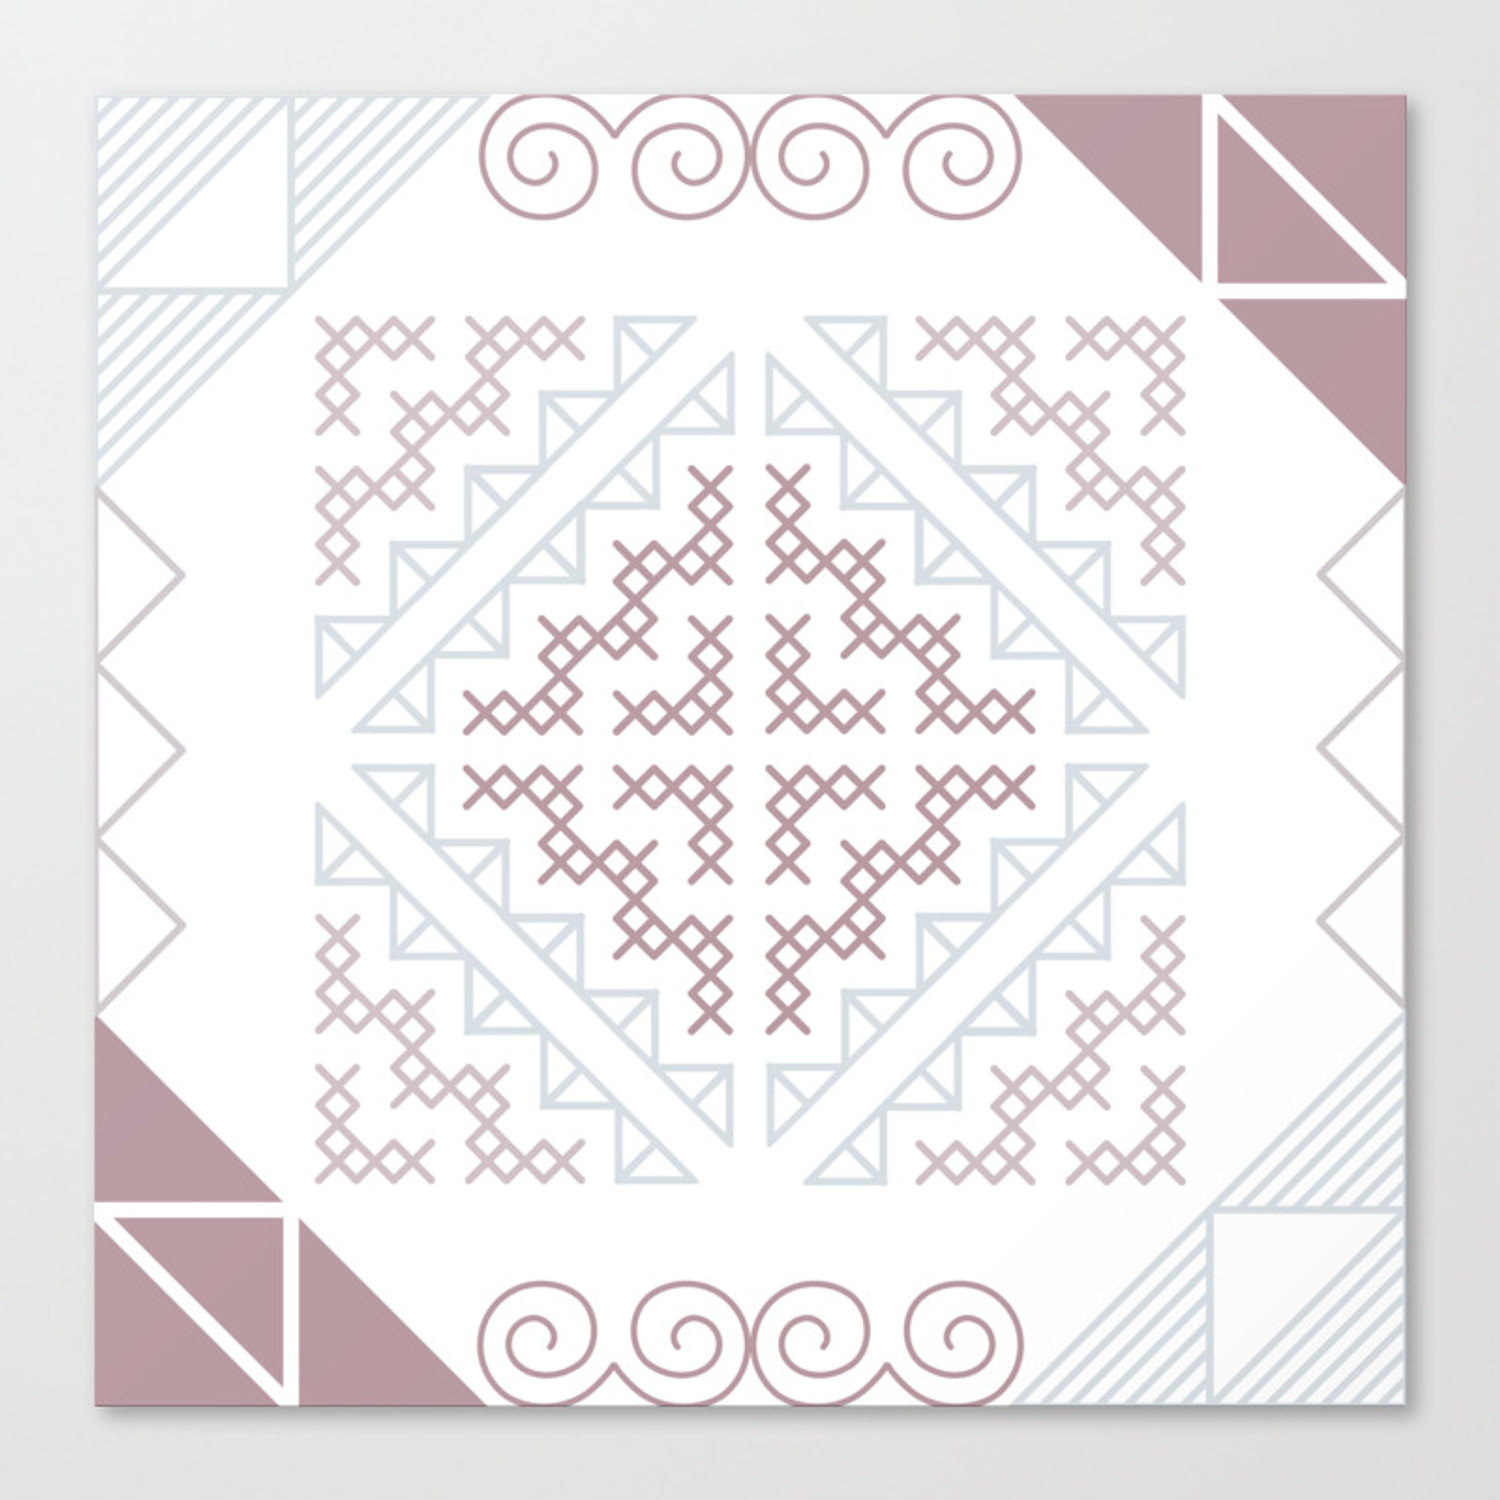 Hmong Embroidery Patterns Tribal Hmong Embroidery Canvas Print